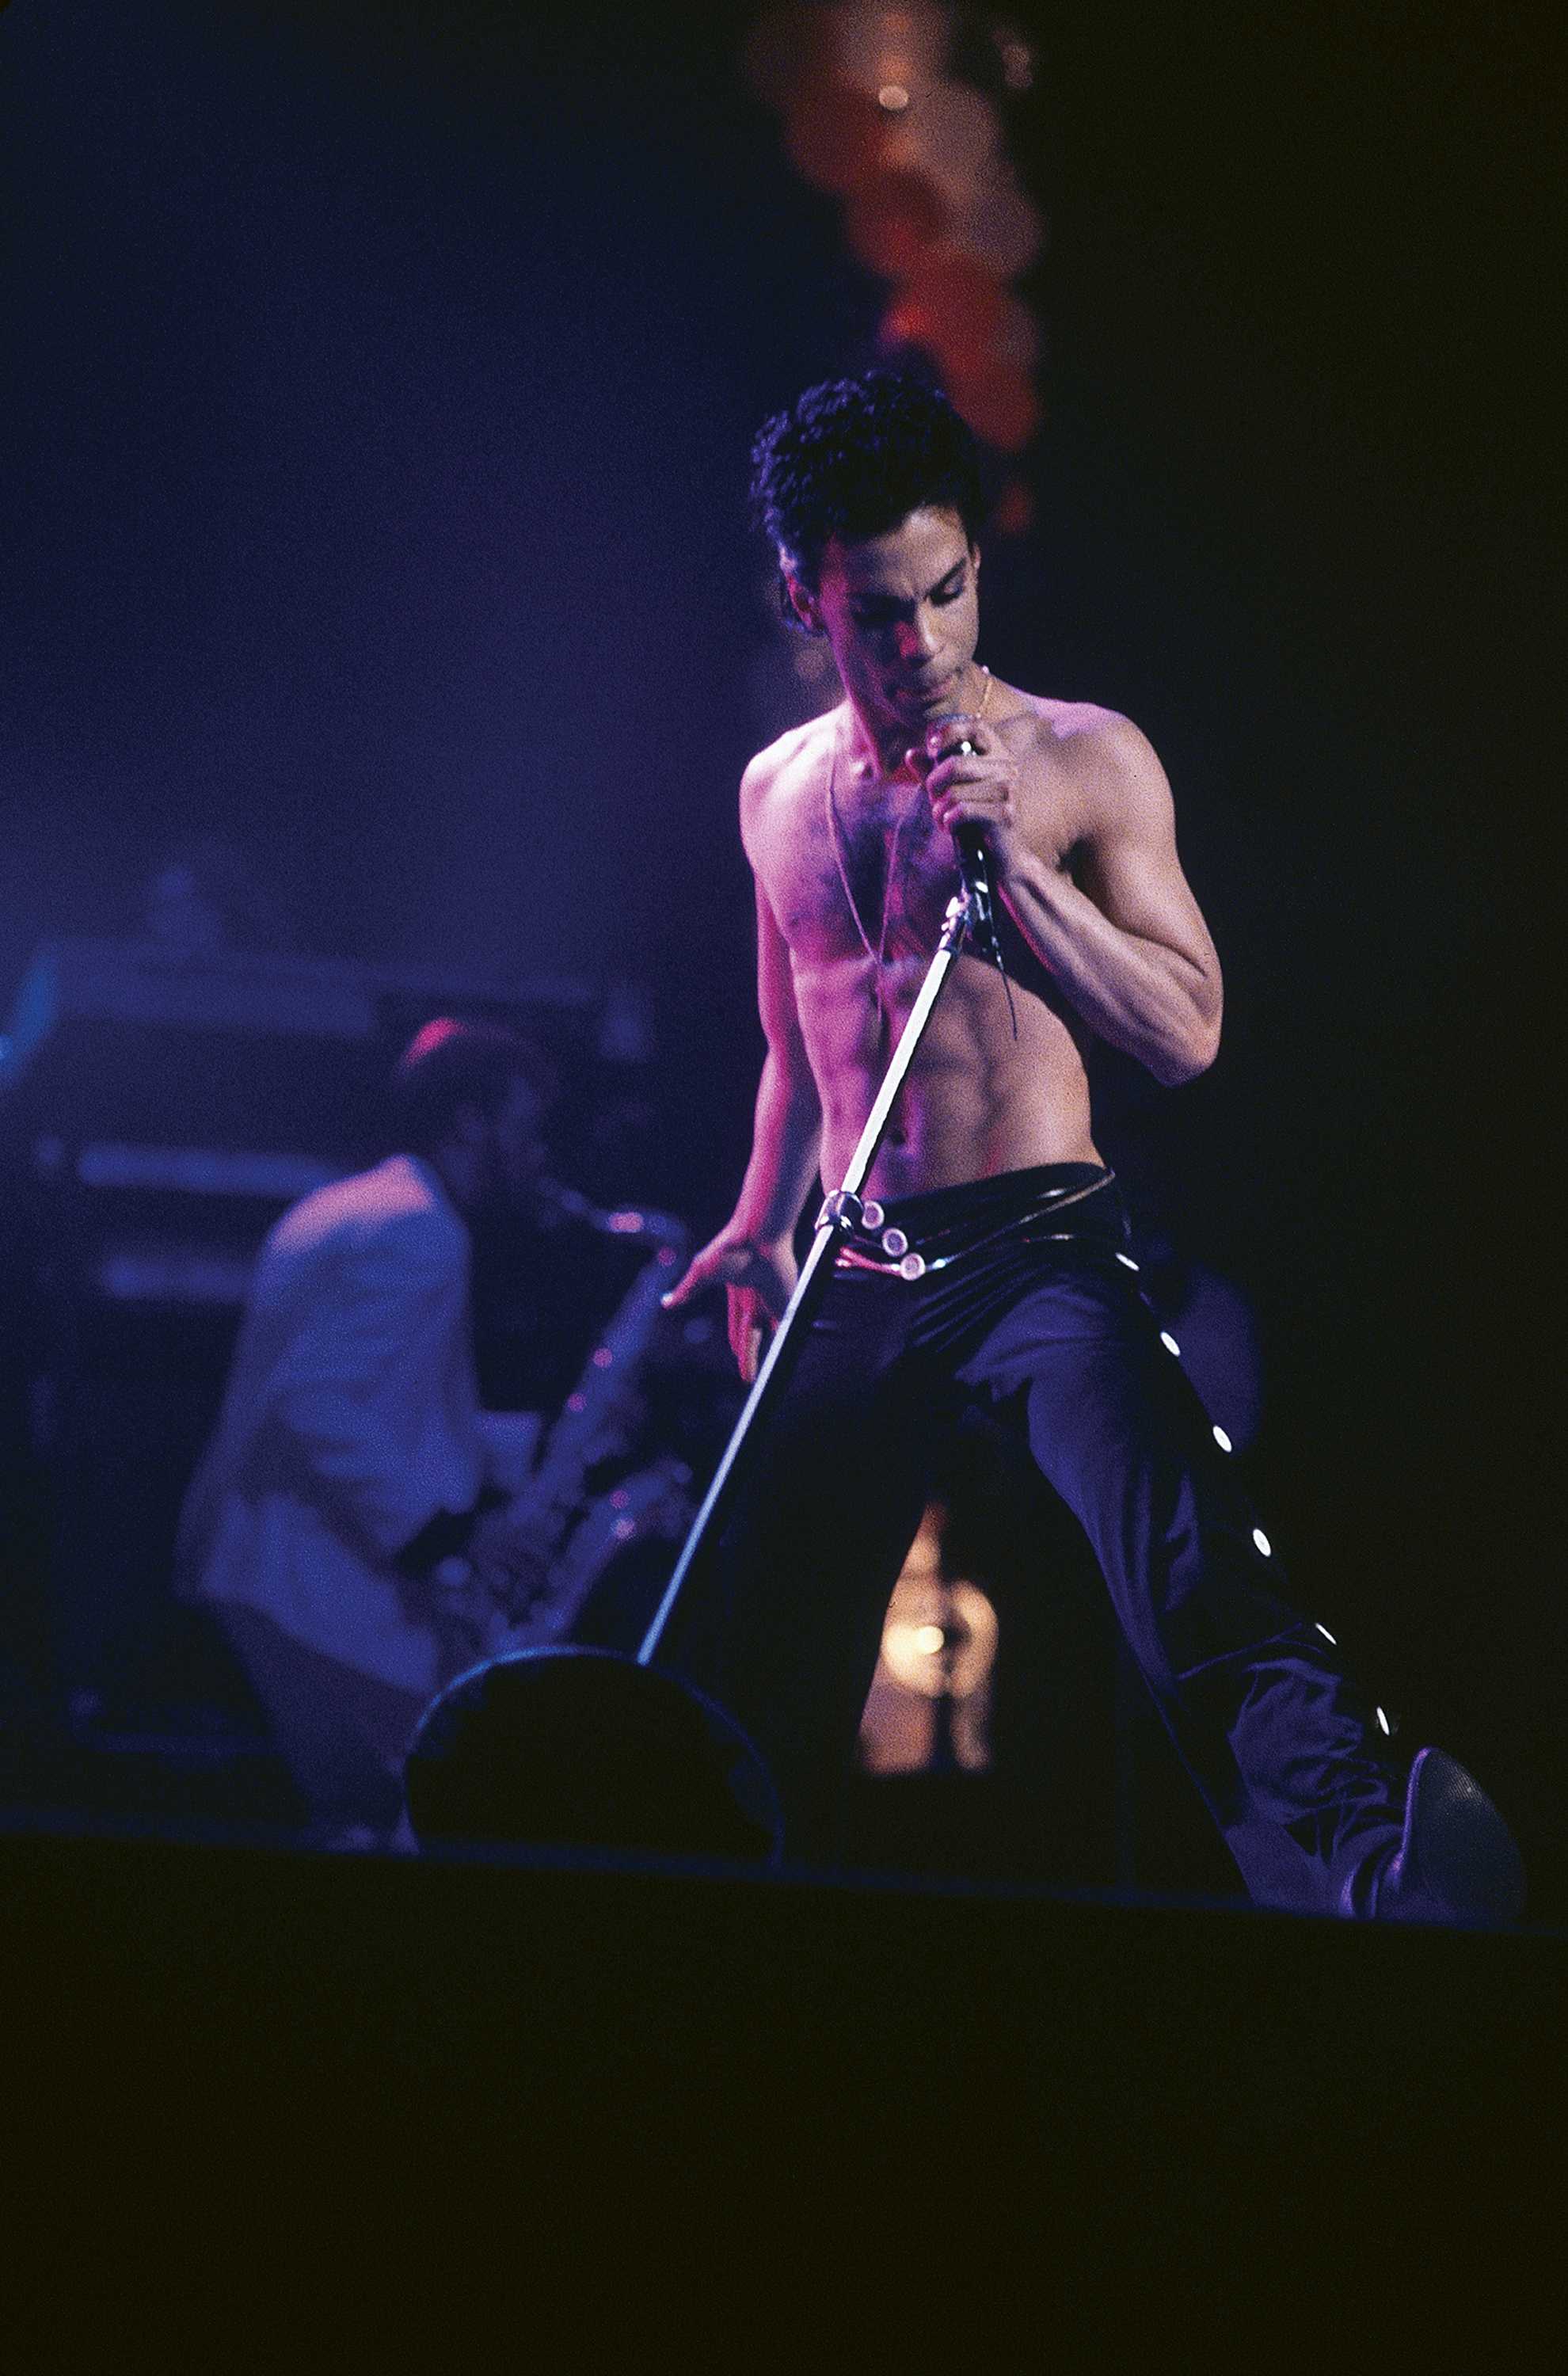 Photograph of Prince performing on stage